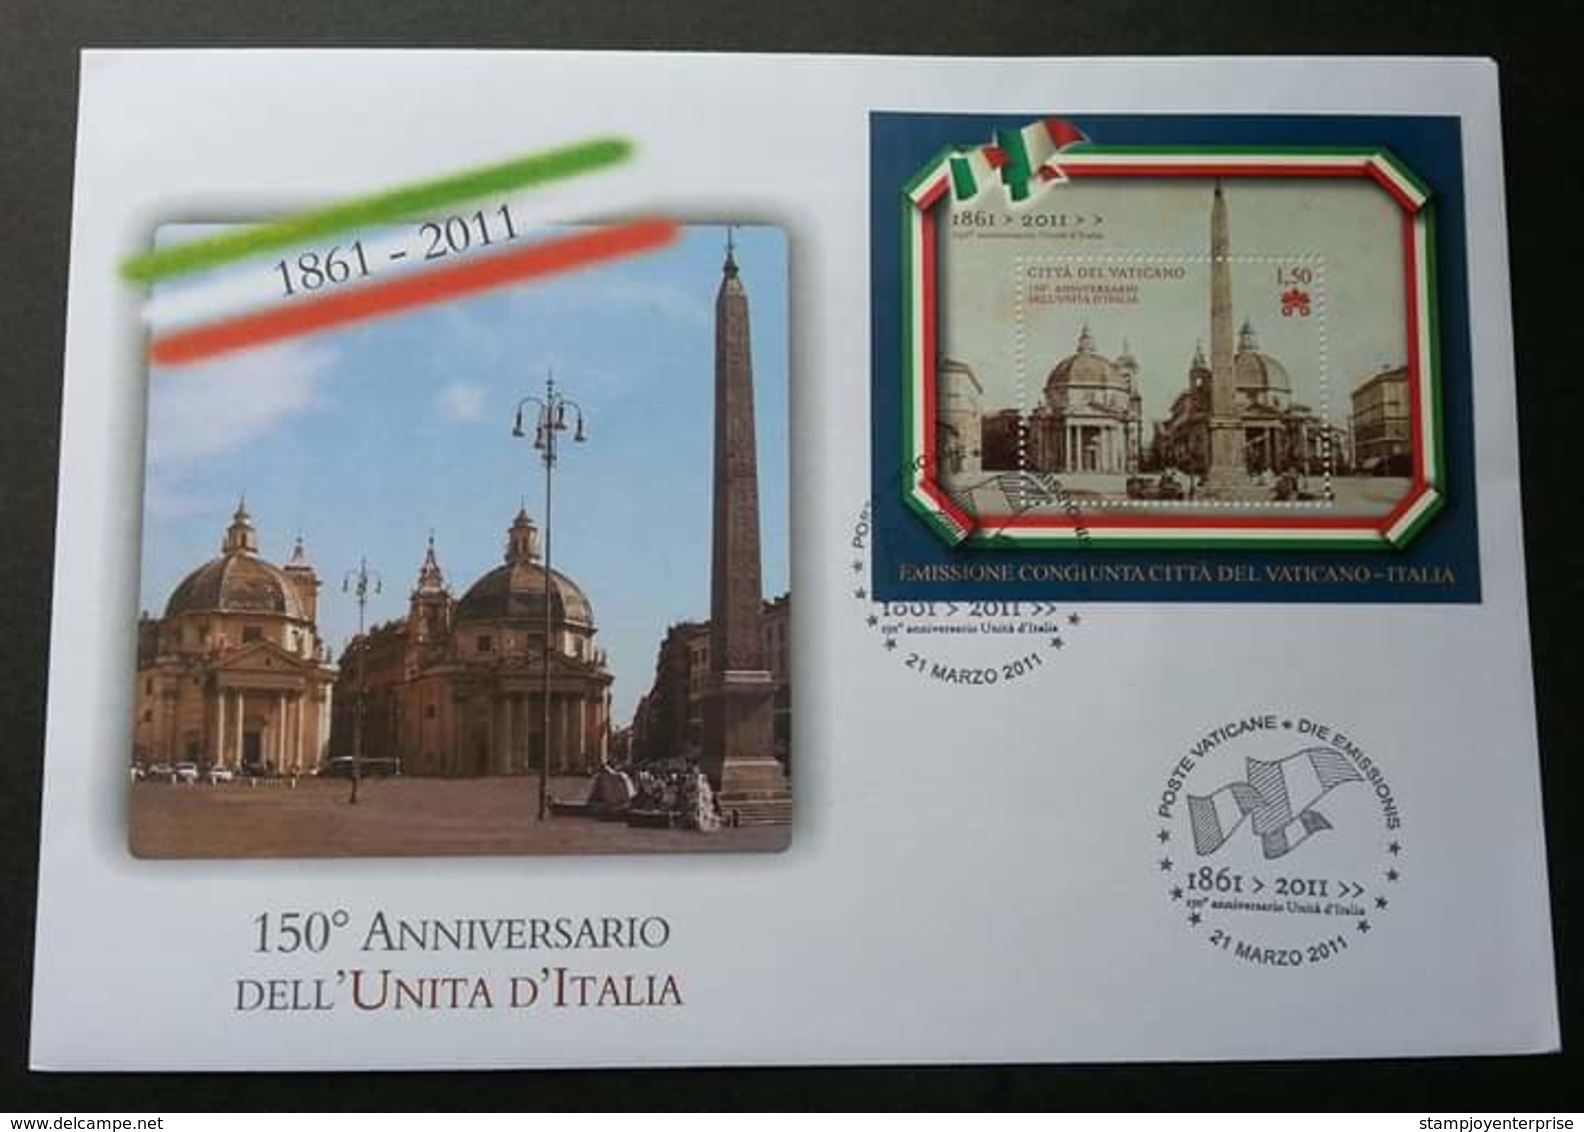 Vatican - Italy Joint Issue 150th Anniversary Of Italy Unity 2011 (miniature FDC) - Covers & Documents